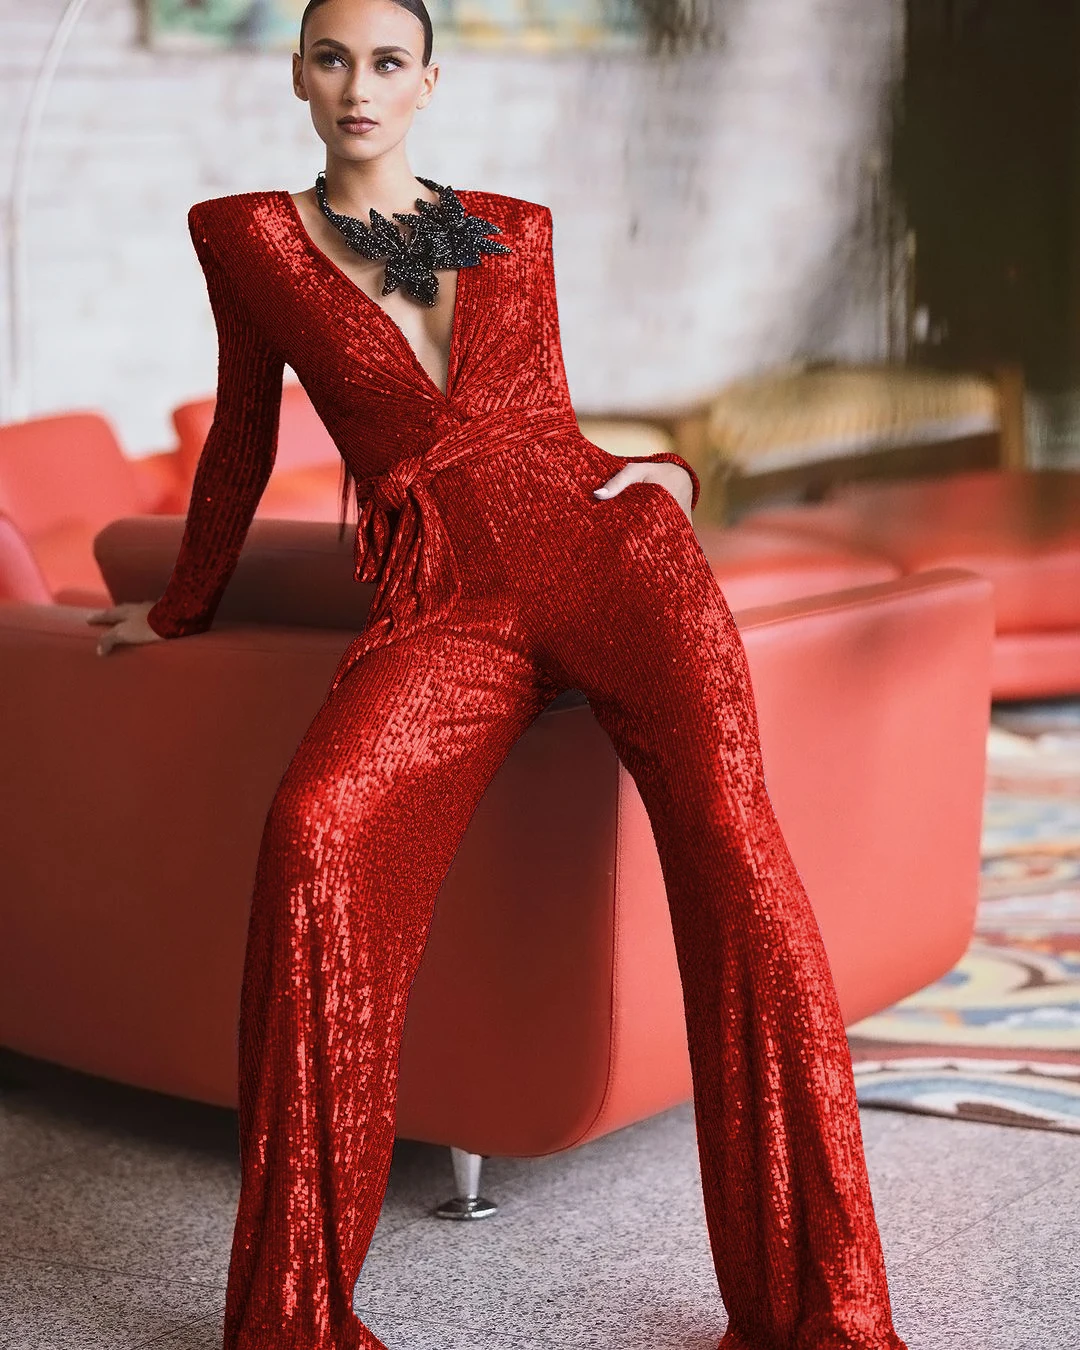 2022 Women Winter Fashion Sexy Long Sleeve Deep V Neck Glitter Red Sequins Bodycon Jumpsuit Celebrity Designer Bodycon Rompers